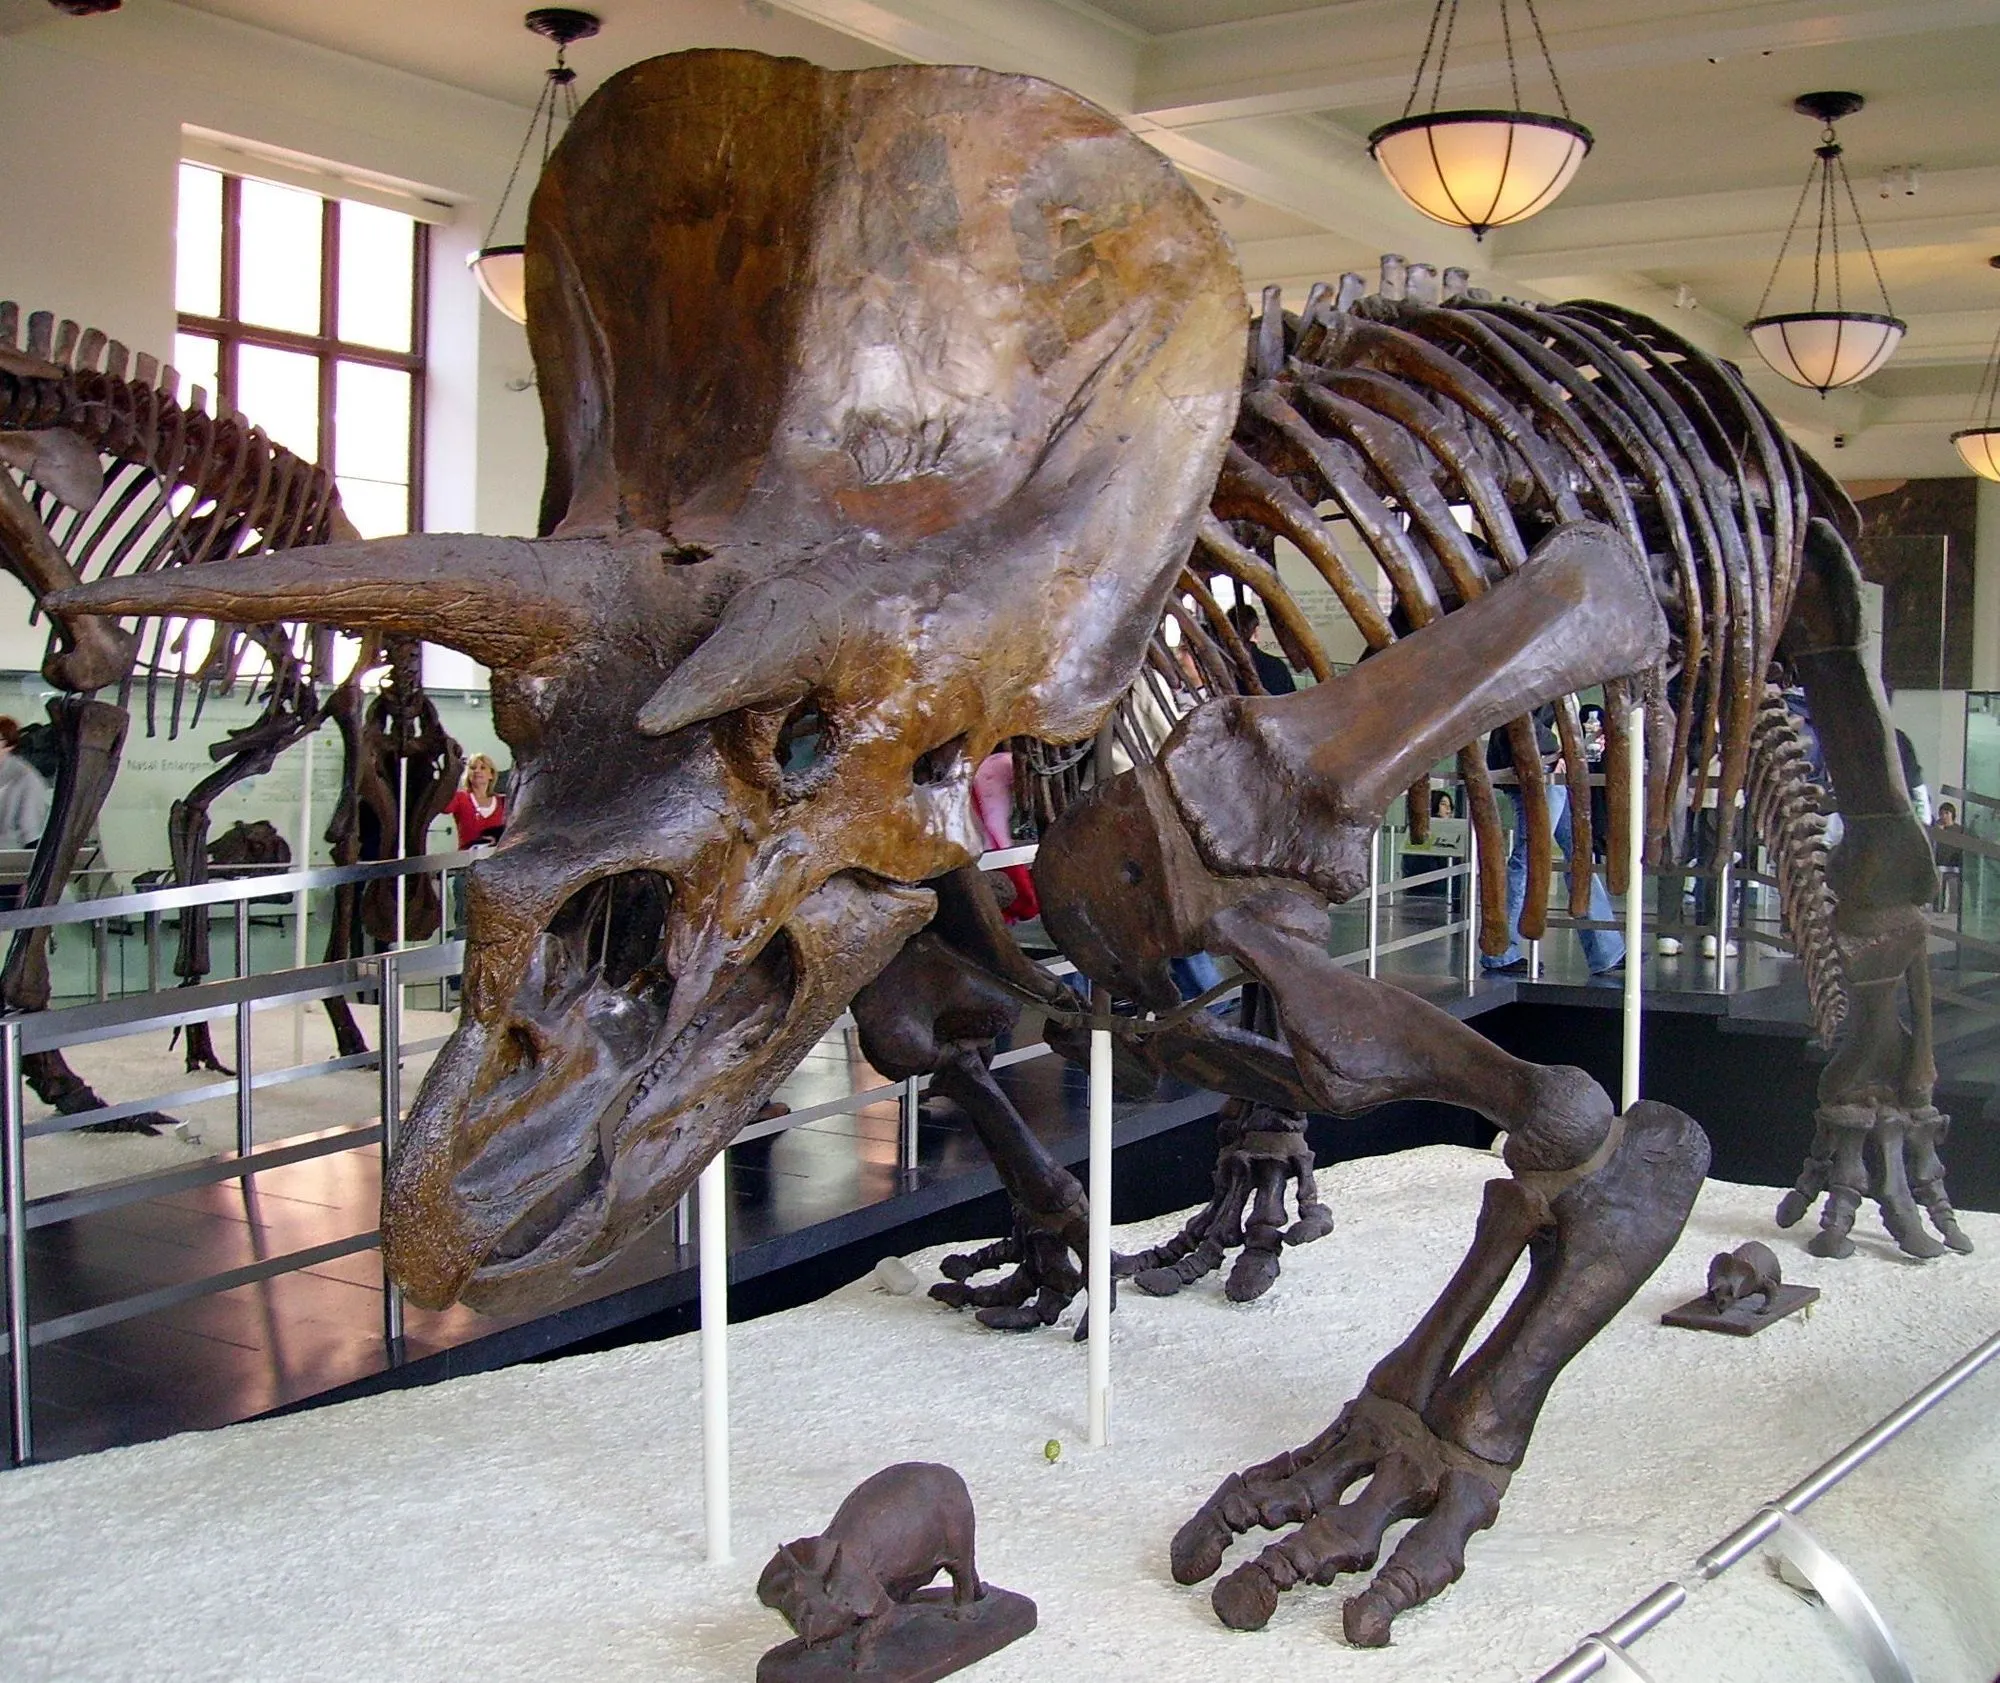 Keep reading for more interesting facts about Wendiceratops.